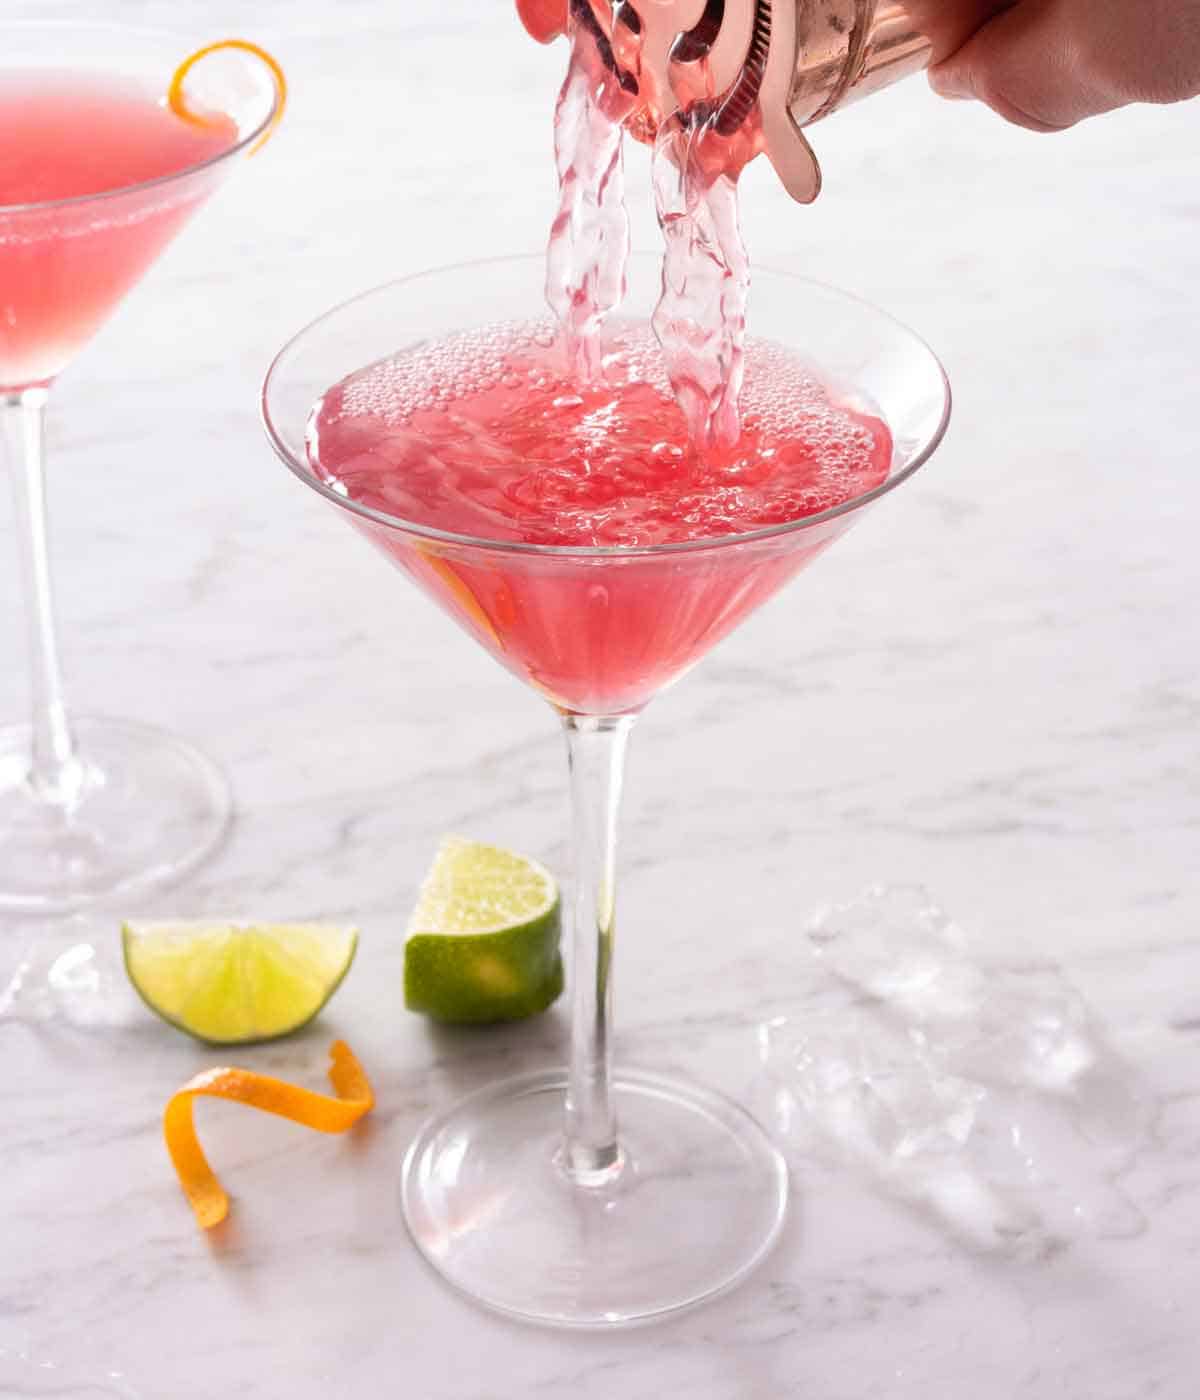 Cosmopolitan strained out of a cocktail shaker into a martini glass.